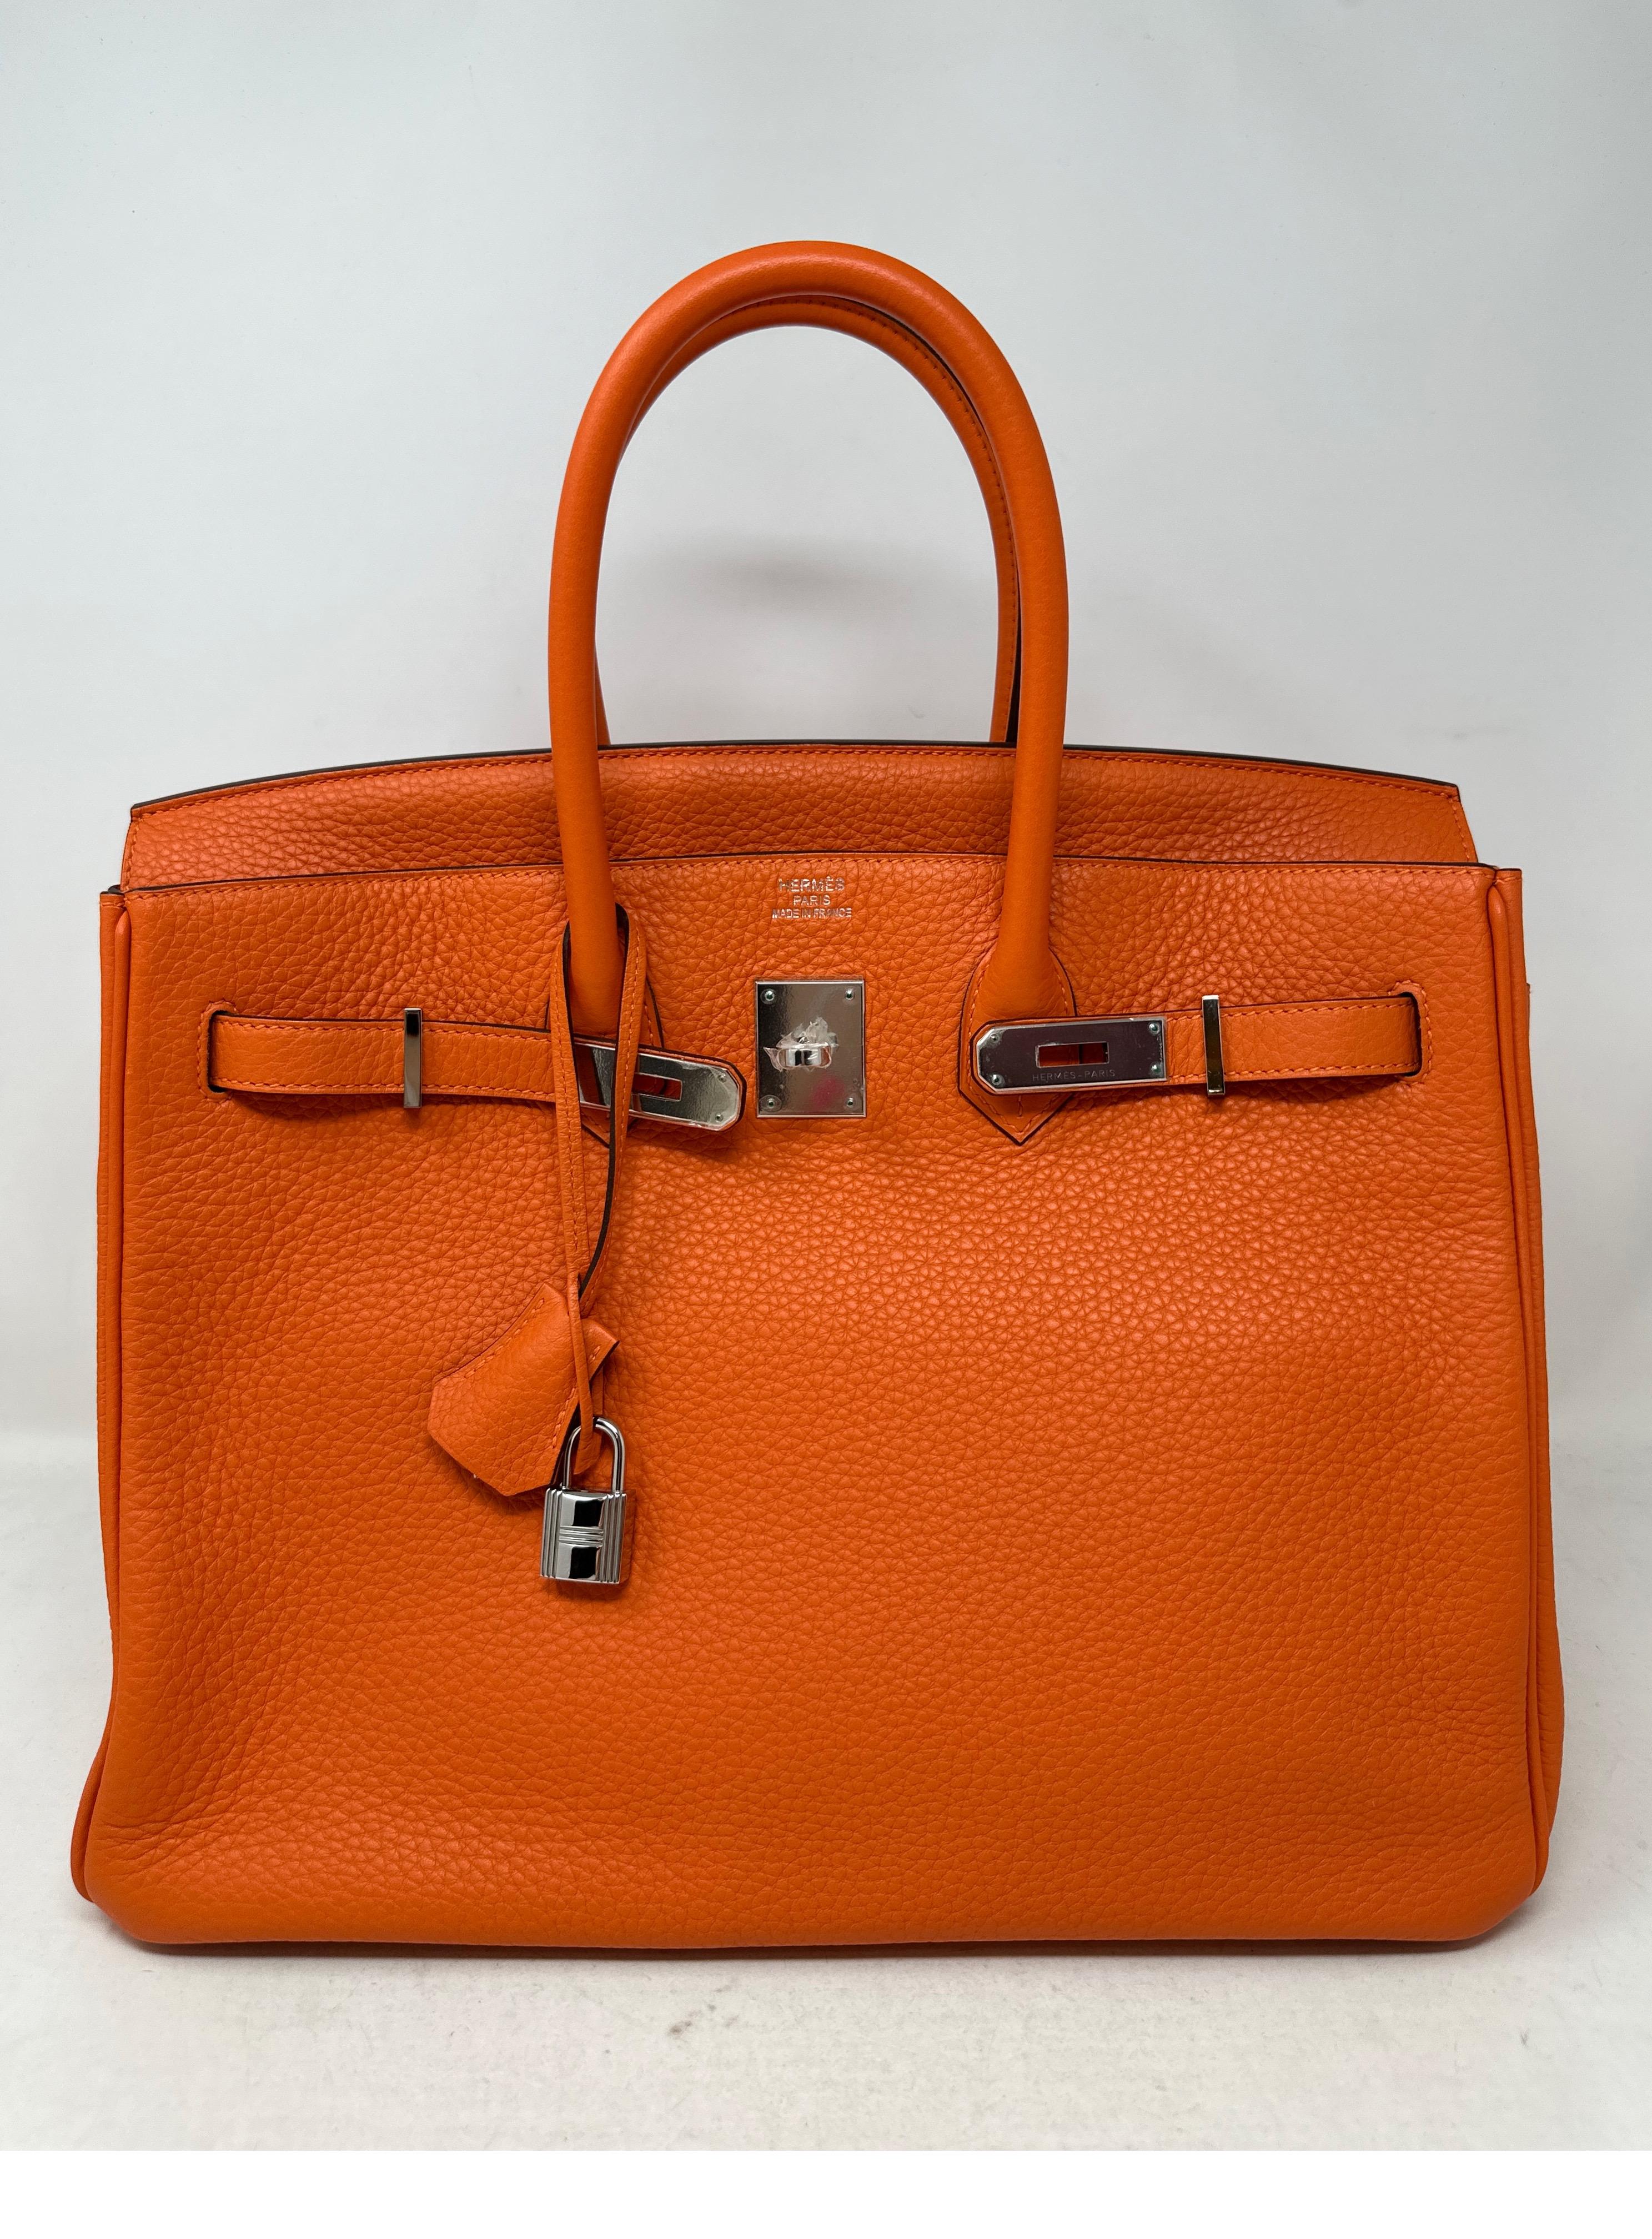 Hermes Orange Birkin 35 Bag. Palladium silver hardware. Excellent condition. Clemence leather. Interior clean. Plastic is still on hardware. Classic original Hermes orange color. Includes clochette, lock, keys, and dust bag. Guaranteed authentic. 